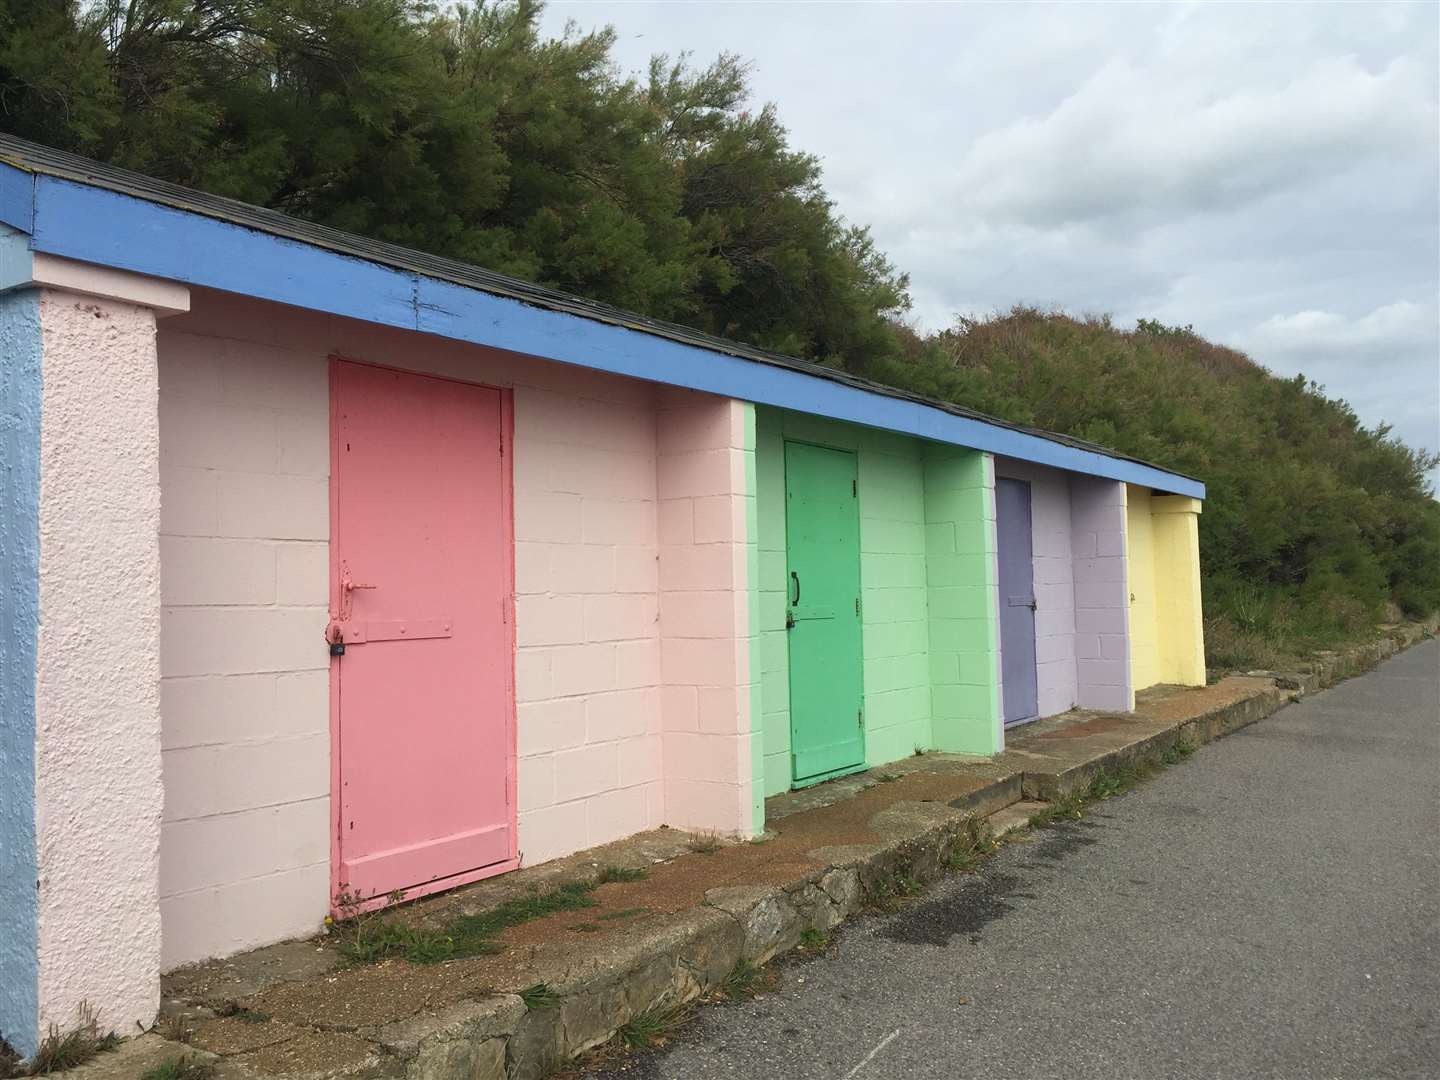 The huts were first painted pastel colours by leaseholder Peter Kemp